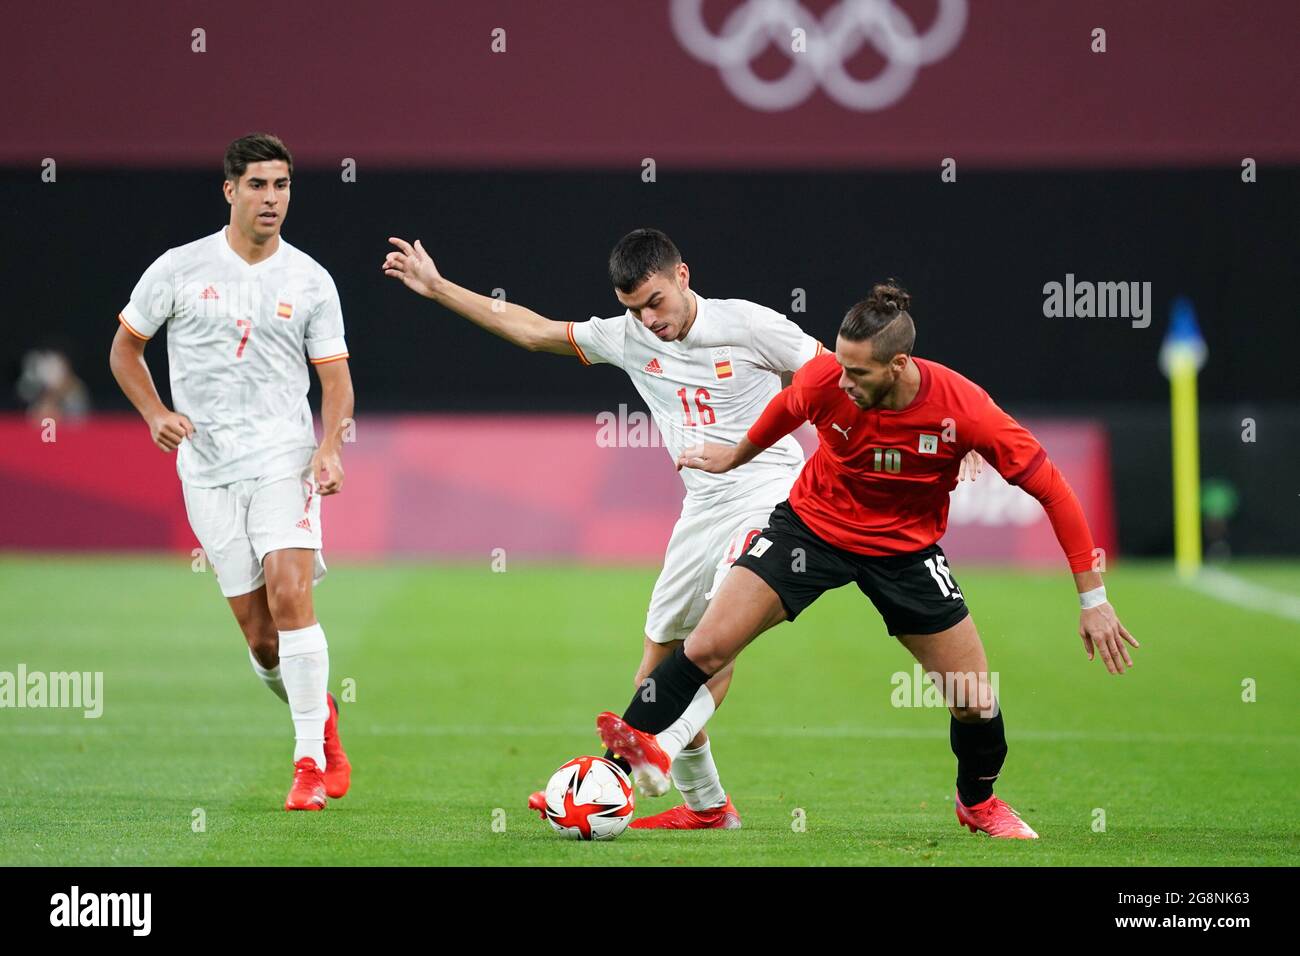 Sapporo, Japan. 22nd July, 2021. Pedri Gonzalez (16 Spain) and Ramadan Sobhi (11 Egypt) battle for the ball (duel) during the Men's Olympic Football Tournament Tokyo 2020 match between Egypt and Spain at Sapporo Dome in Sapporo, Japan. Credit: SPP Sport Press Photo. /Alamy Live News Stock Photo